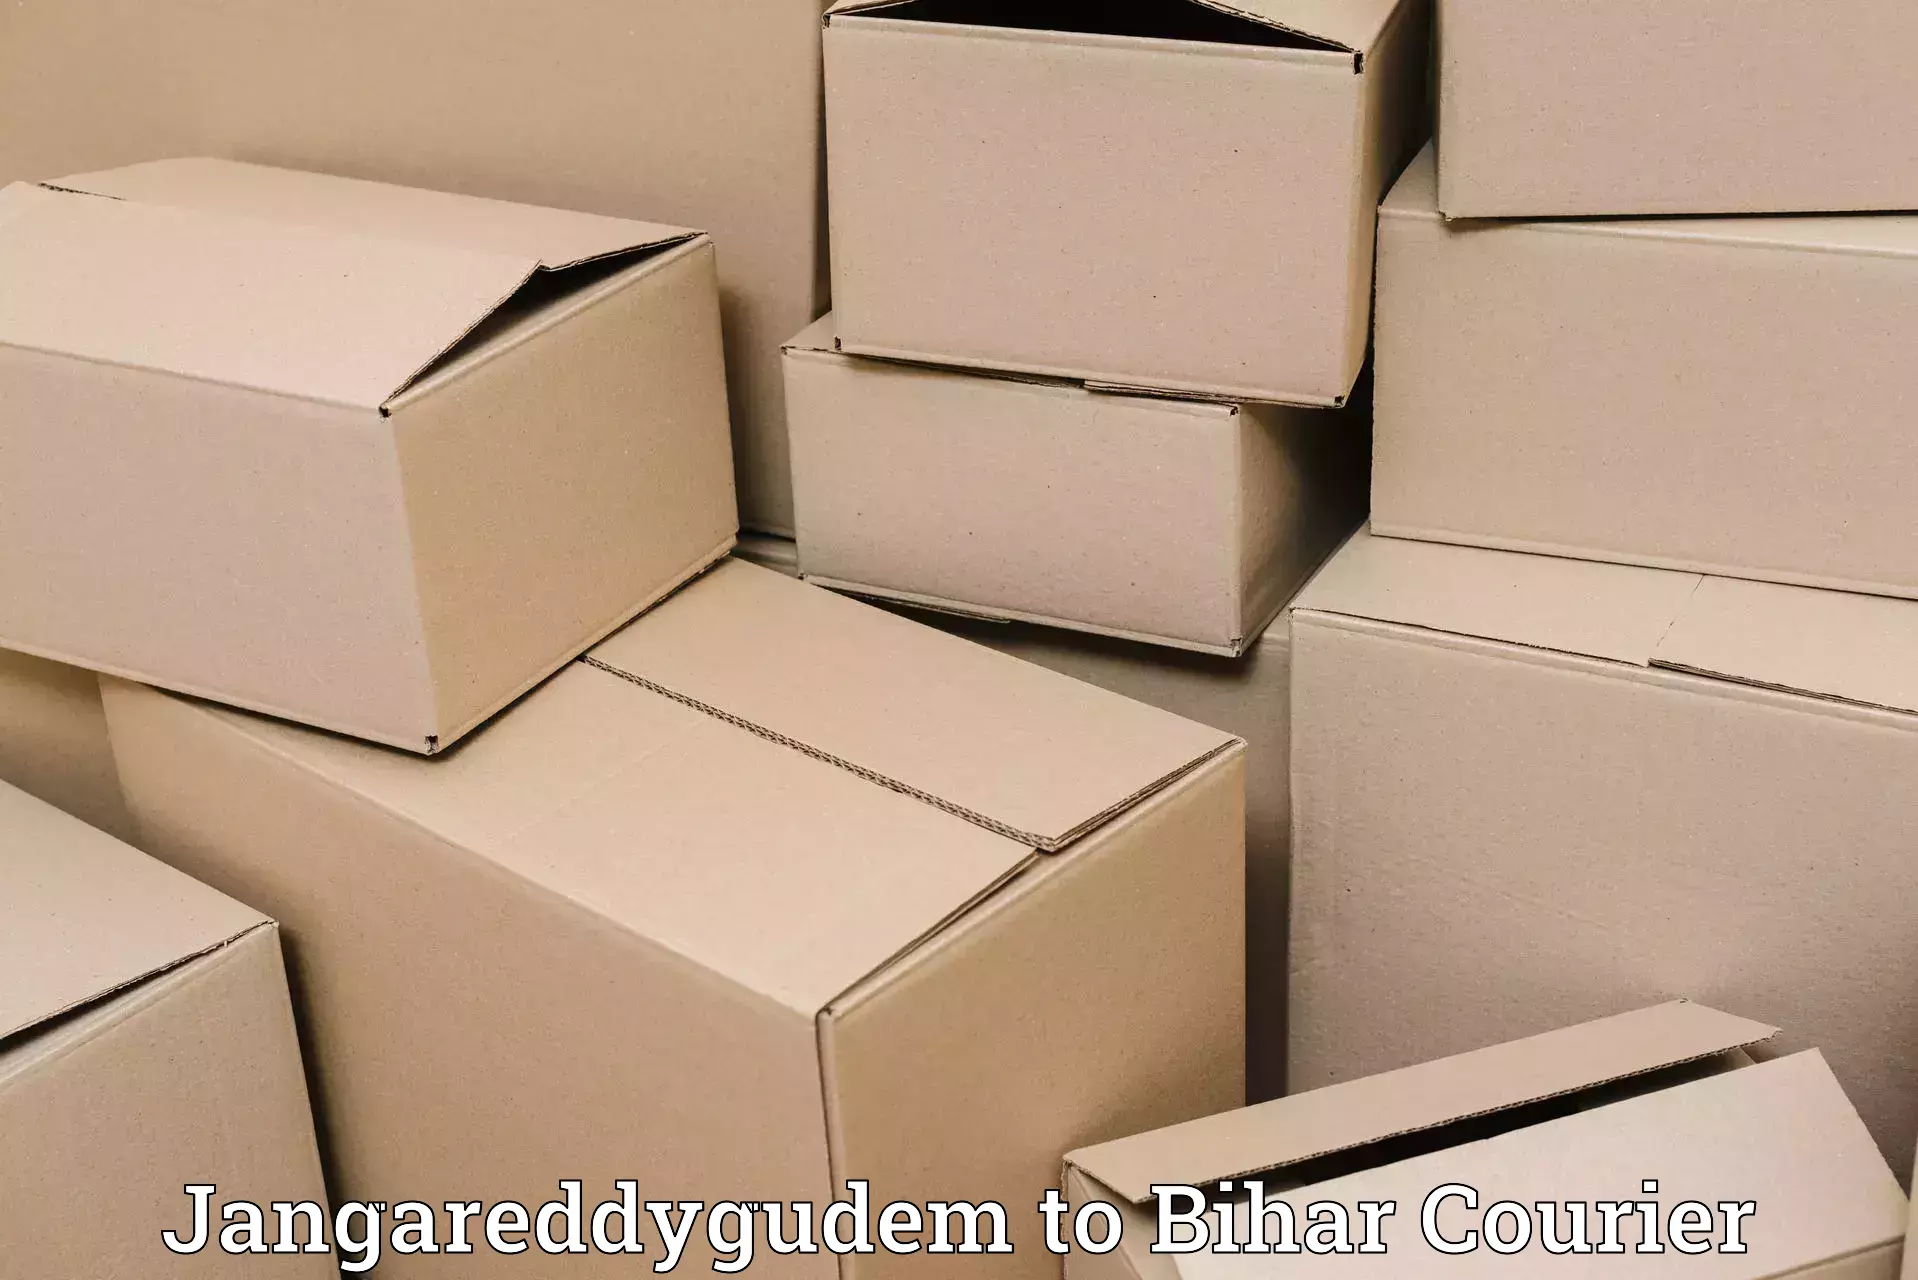 Cost-effective shipping solutions Jangareddygudem to Bankipore